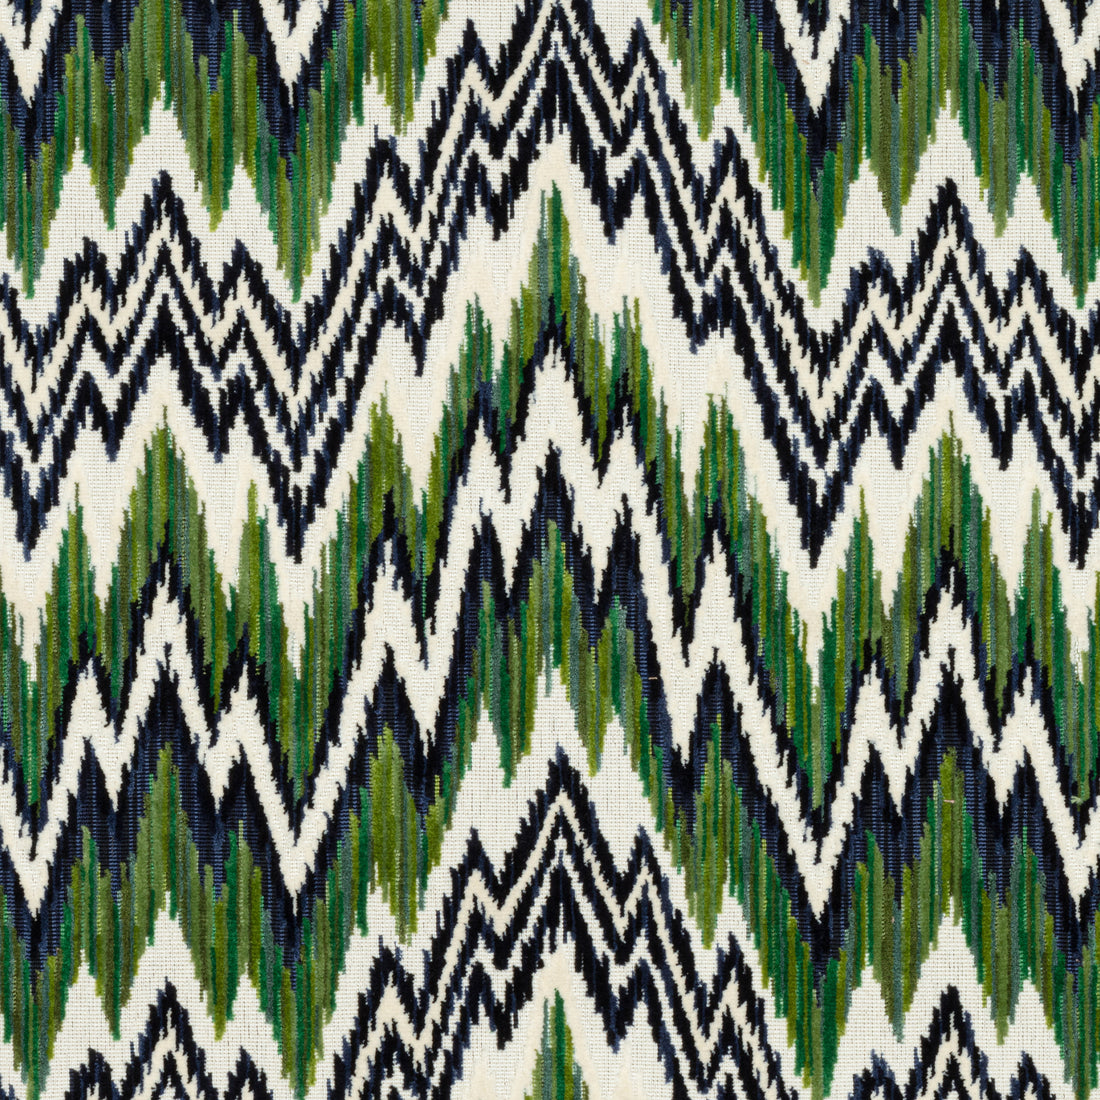 Rhythm Velvet fabric in emerald and navy color - pattern number W72817 - by Thibaut in the Woven Resource 13: Fusion Velvets collection